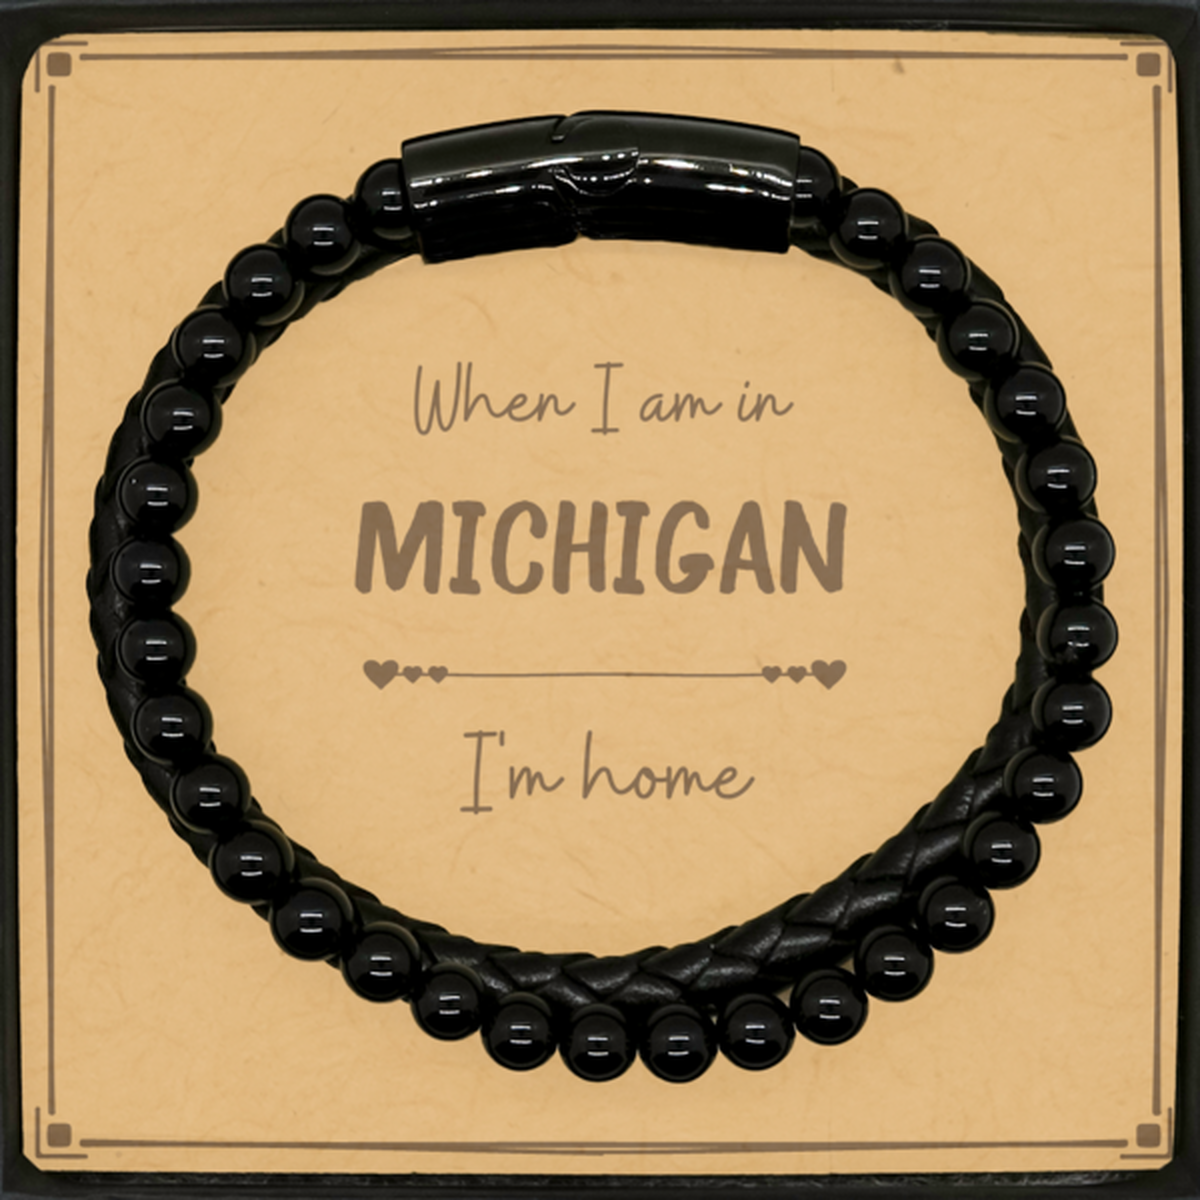 When I am in Michigan I'm home Stone Leather Bracelets, Message Card Gifts For Michigan, State Michigan Birthday Gifts for Friends Coworker